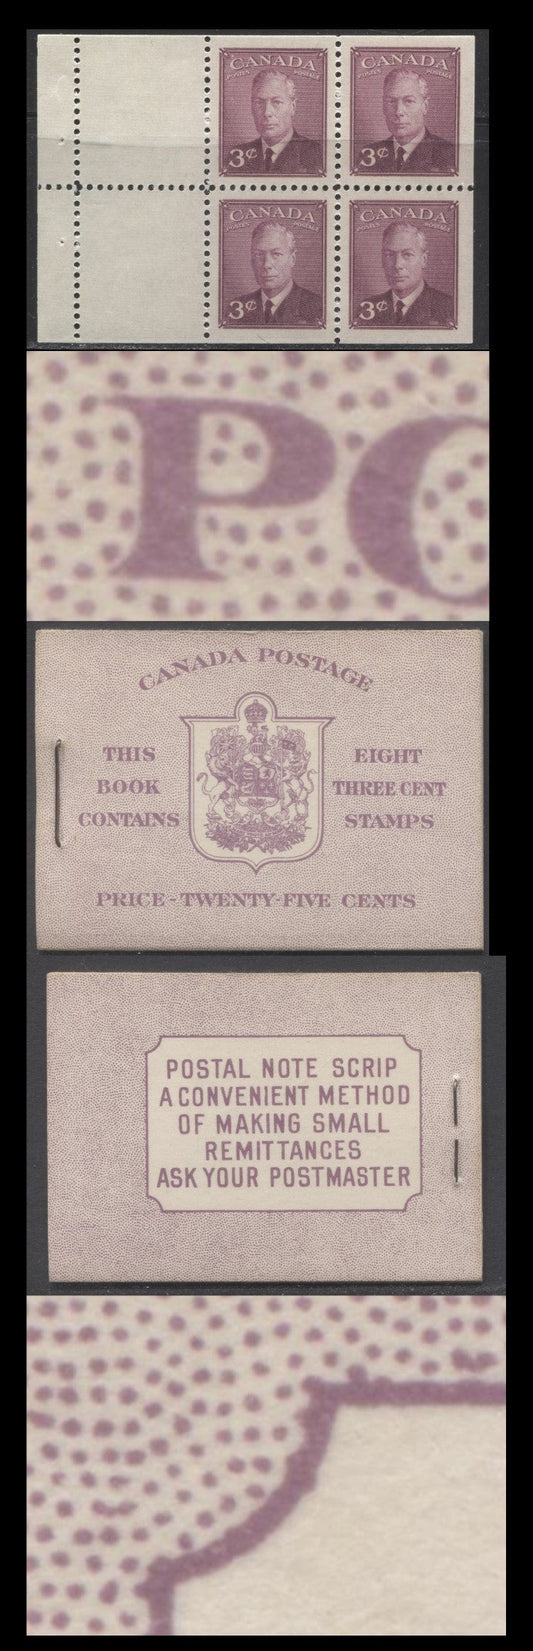 Lot 67 Canada #BK40aE 1949-1951 KGVI Issue, A Complete 25c English Booklet With 3c Rose Violet, 2 Panes Of 4+2 Labels. Front Cover IIf, Back Cover Cai, Type I Cover, 7c & 5c Rates, 'Postmaster', 825,000 Issued